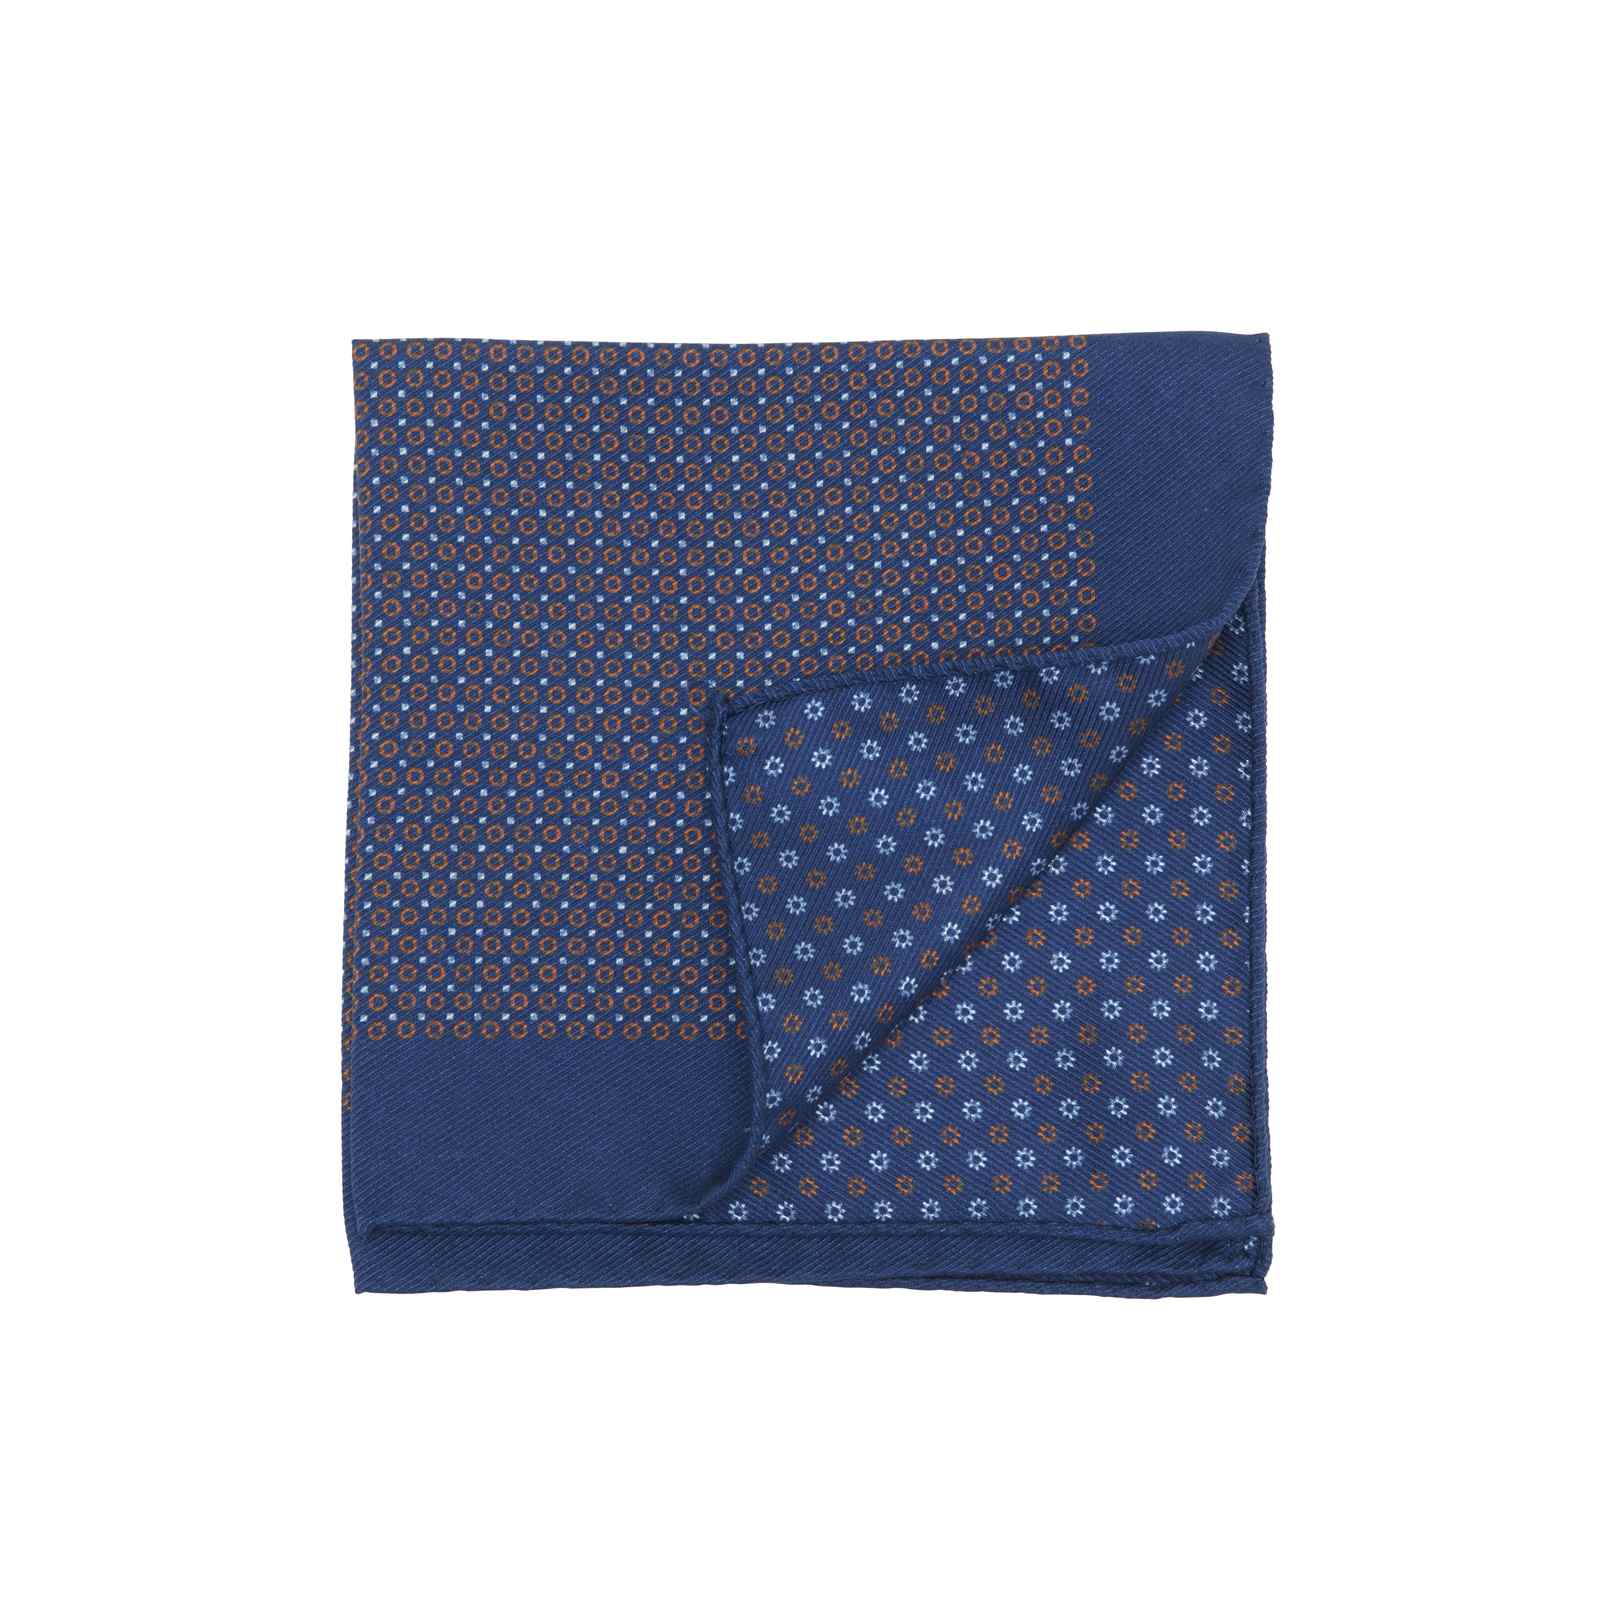 Navy Pocket Square with Small Rust Red Circles